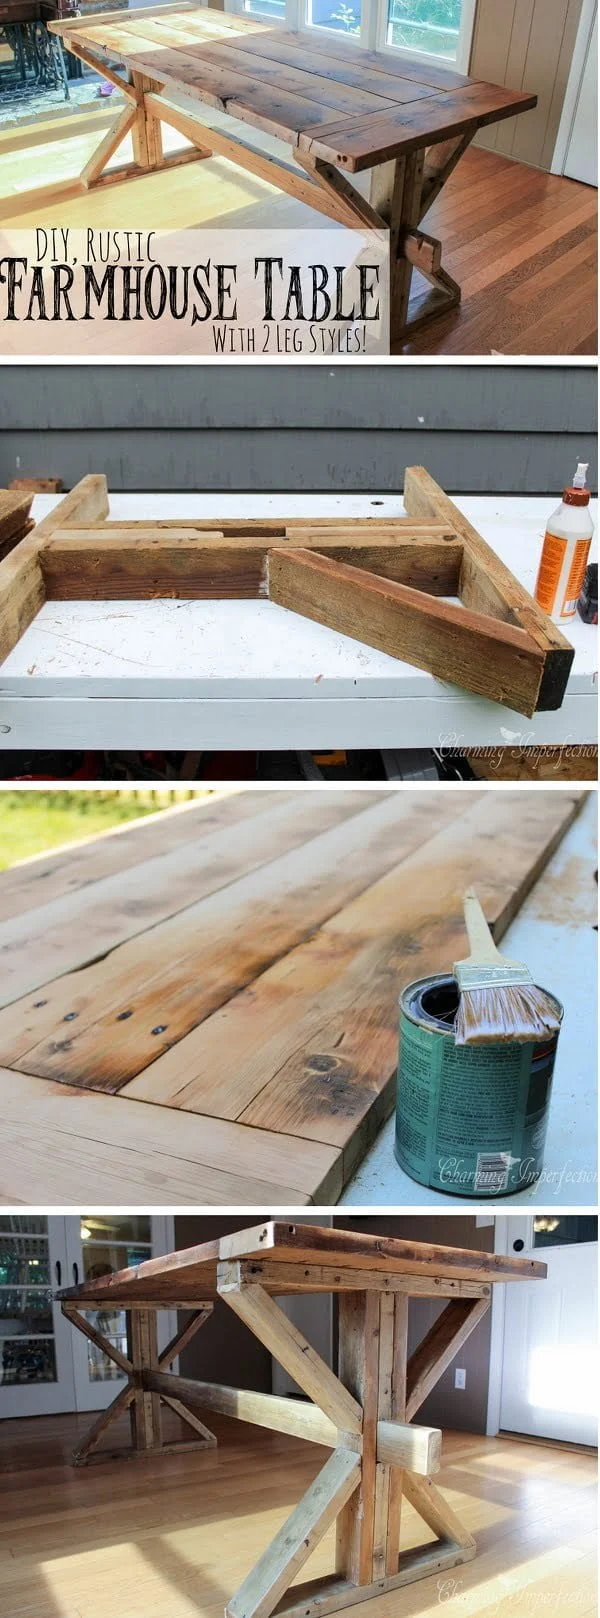 Check out the tutorial how to build a DIY rustic farmhouse dining table 